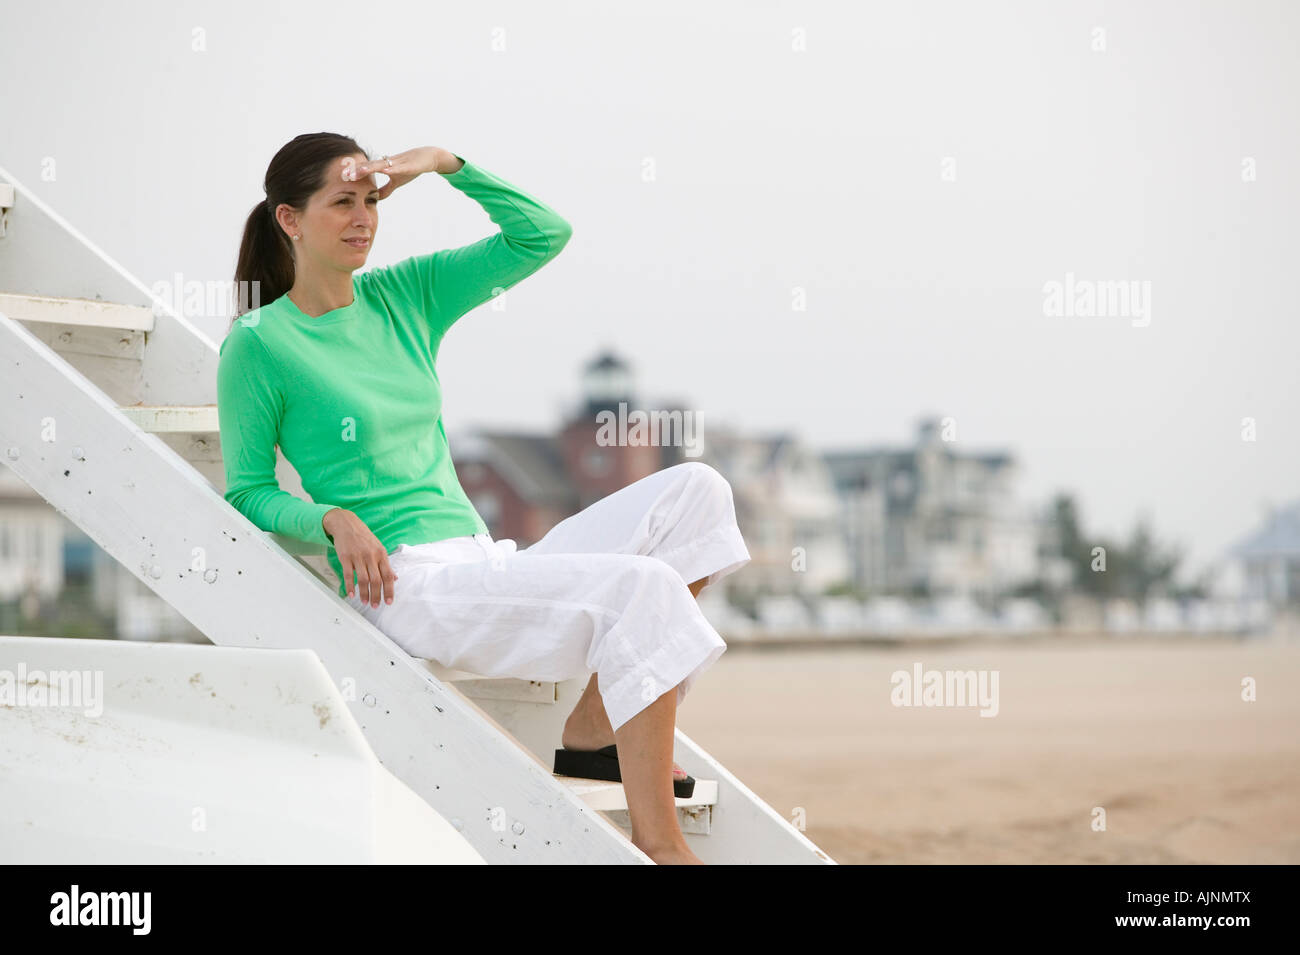 woman in mid 30s peers out to sea from a Lifeguard Chair in Sea Girt New Jersey Stock Photo